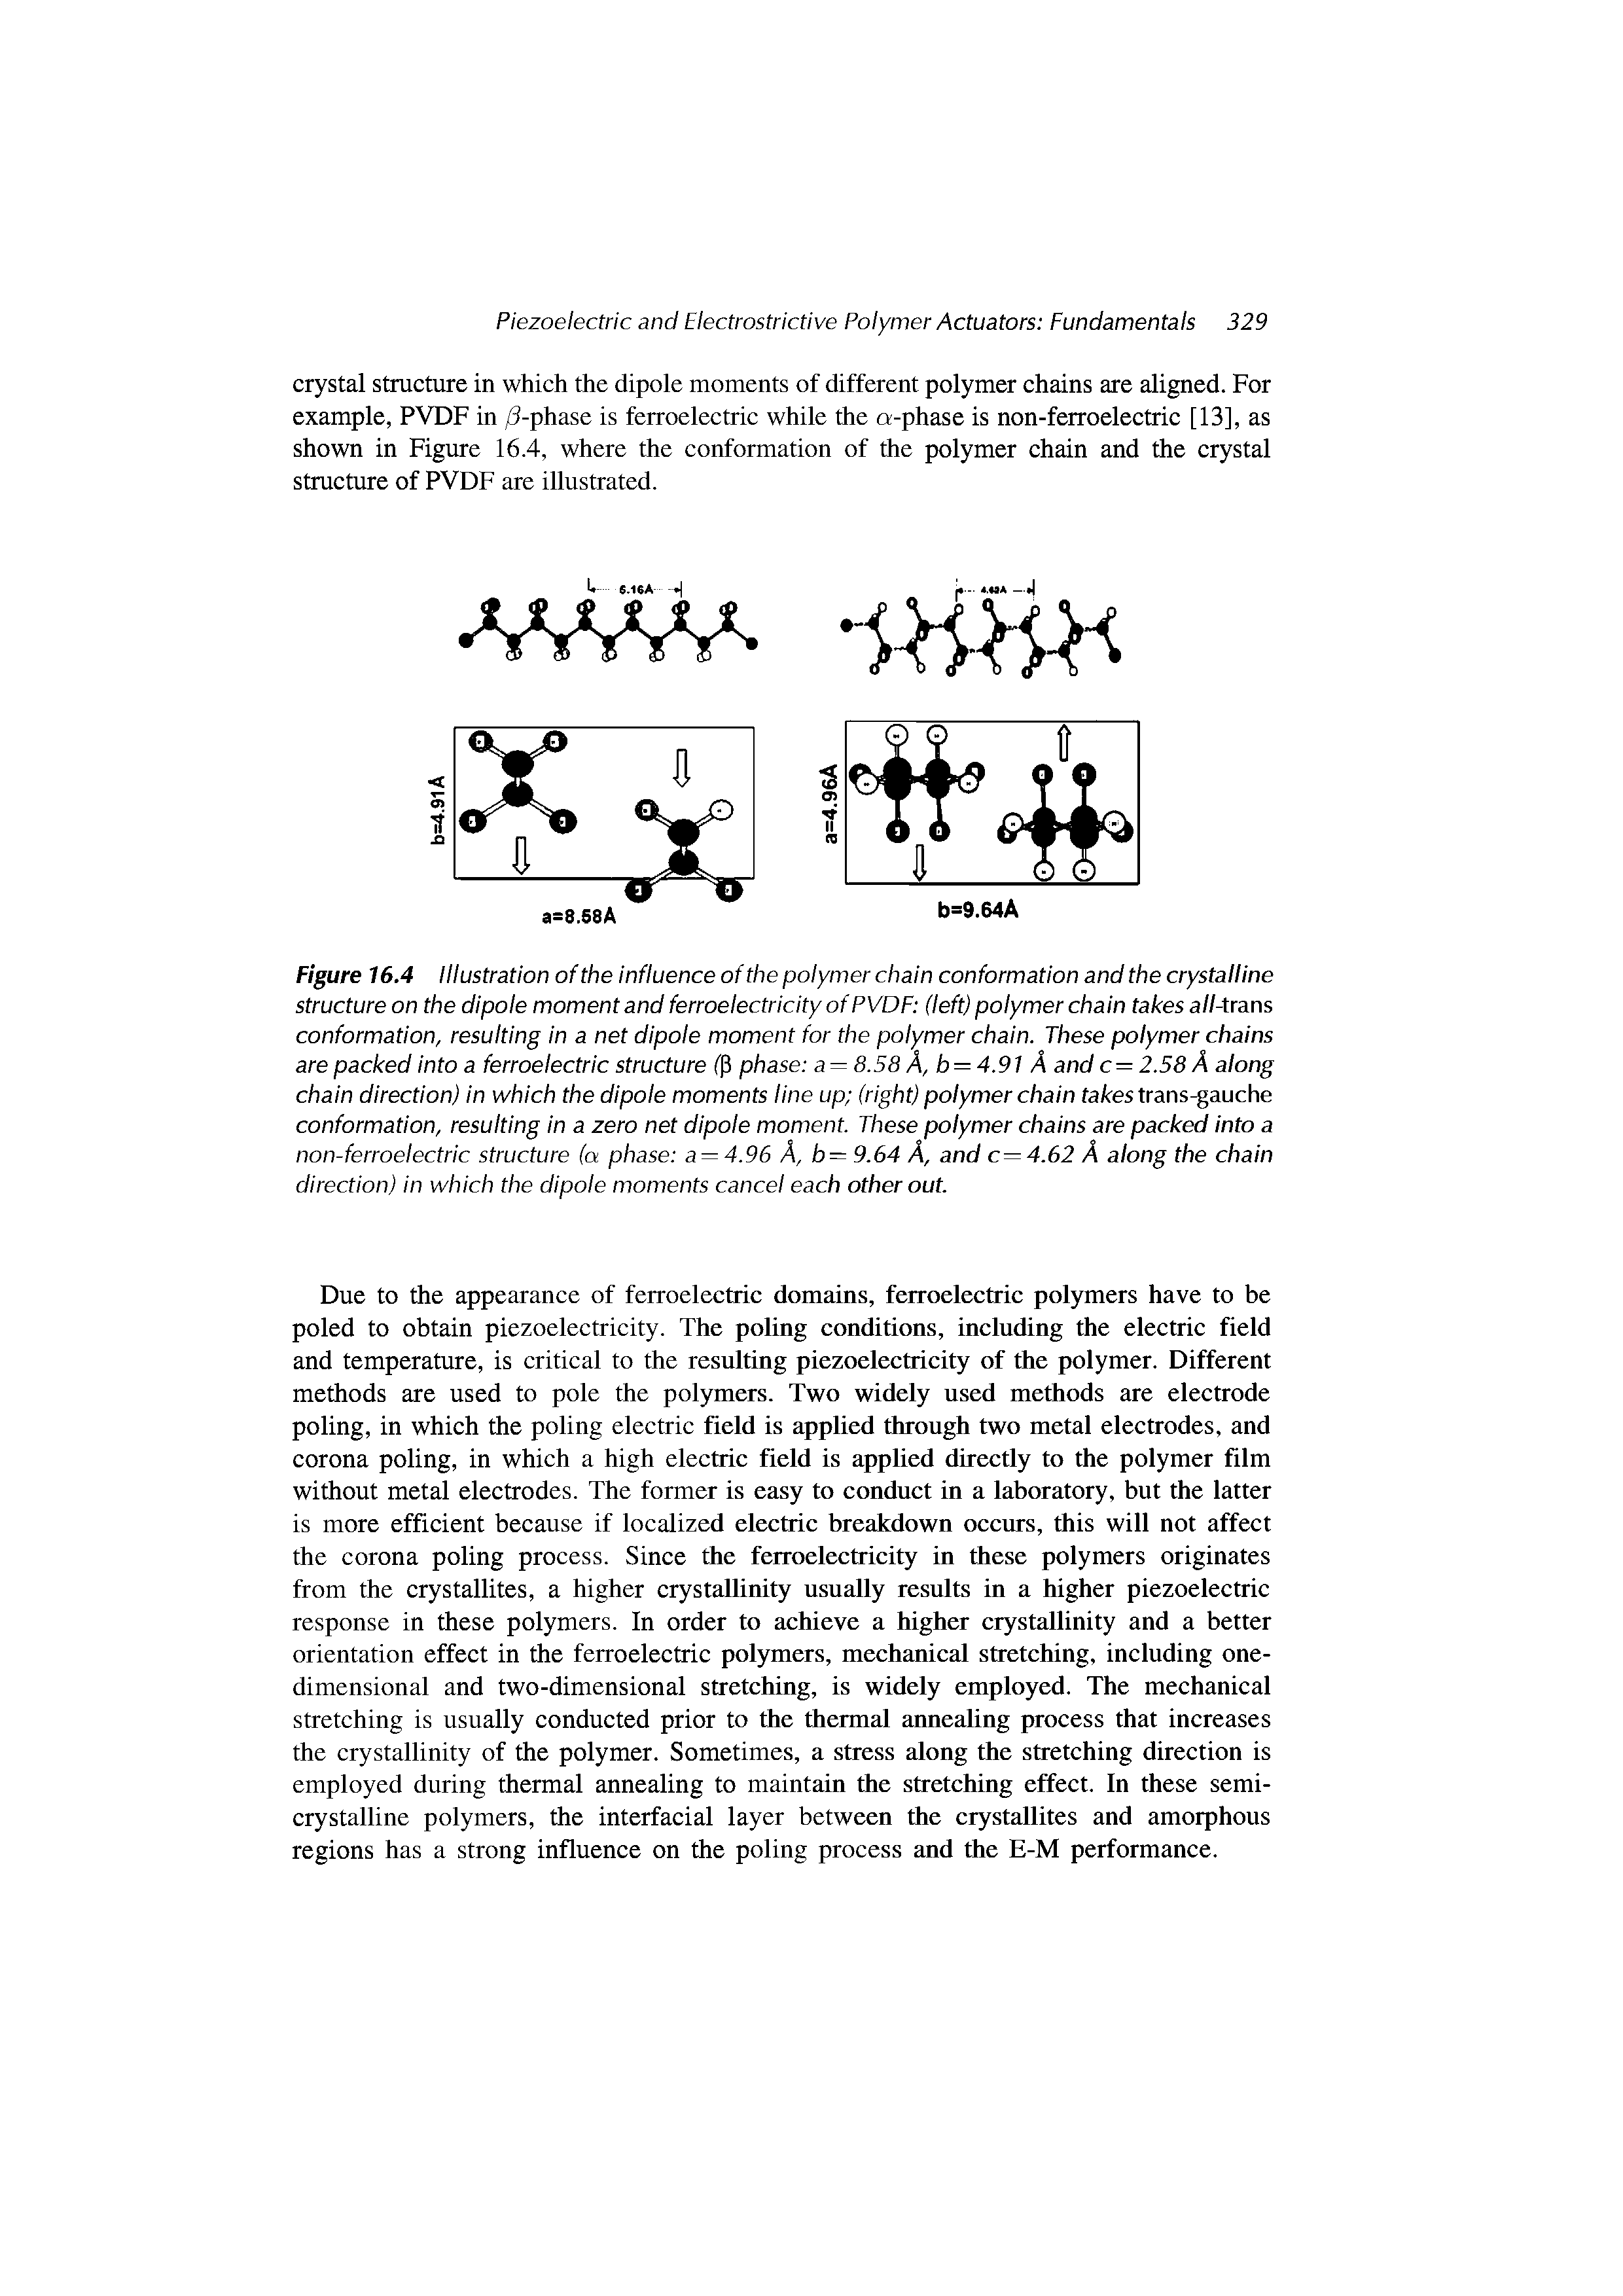 Figure 16.4 Illustration of the influence of the polymer chain conformation and the crystalline structure on the dipole moment and ferroelectricity of PVDF (left) polymer chain takes a//-trans conformation, resulting in a net dipole moment for the polymer chain. These polymer chains are packed into a ferroelectric structure /p phase a —8.58 A, b —4.9 A and c = 2.58 A along chain direction) in which the dipole moments line up (right) polymer chain fates trans-gauche conformation, resulting in a zero net dipole moment. These polymer chains are packed into a non-ferroelectric structure (a phase a = 4.96 A, b 9.64 A, and c= 4.62 A along the chain direction) in which the dipole moments cancel each other out.